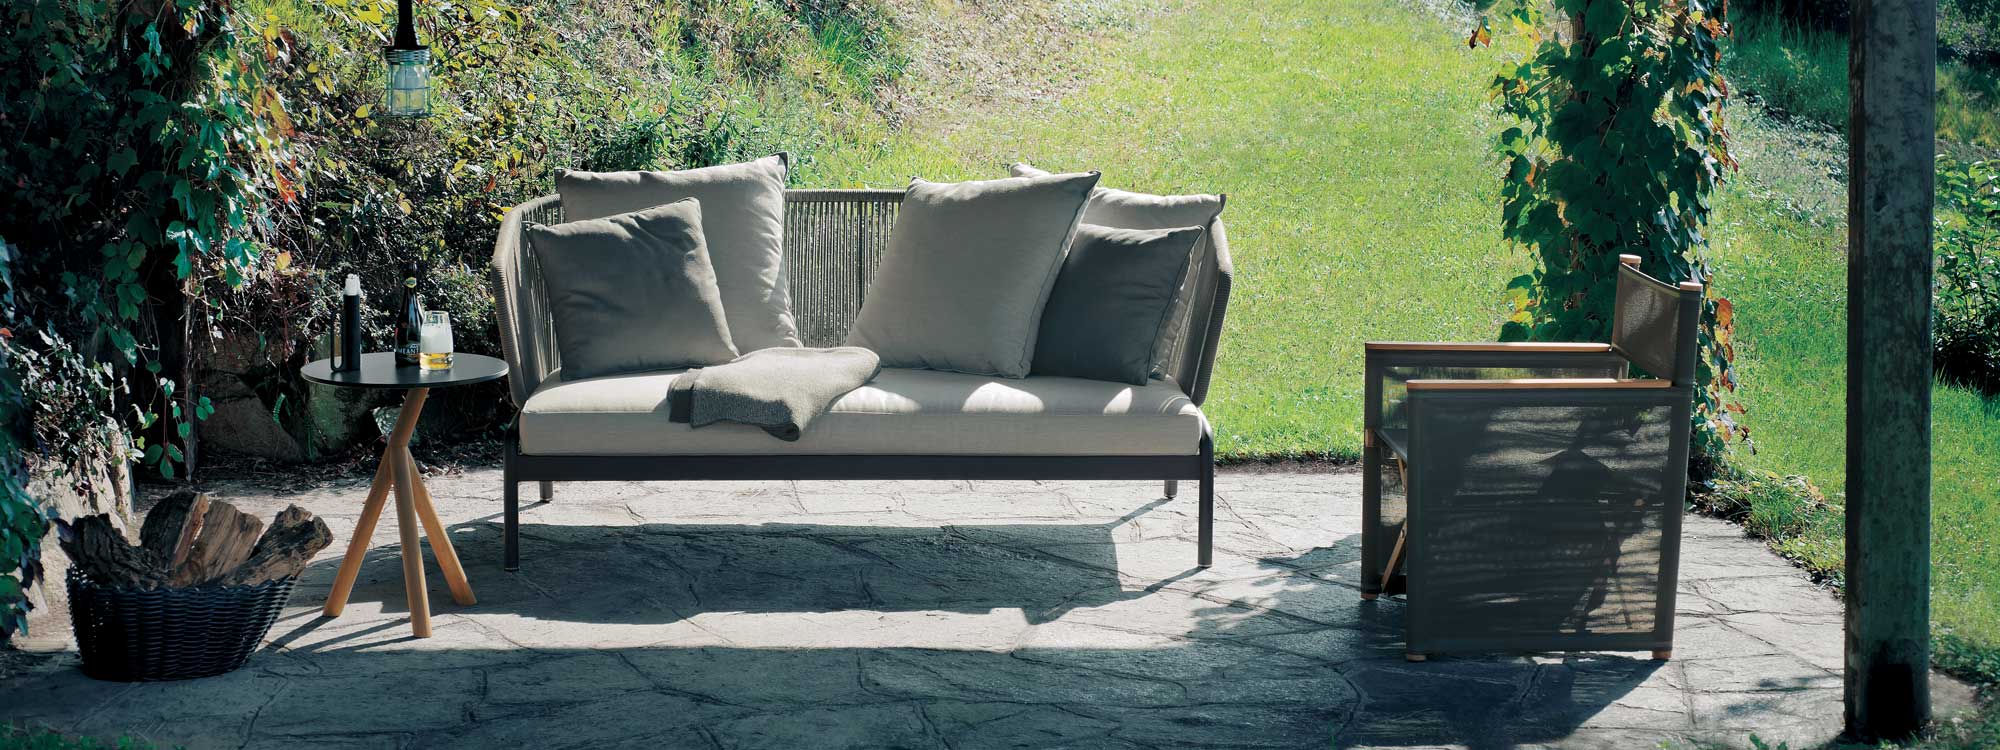 Spool modern outdoor sofa and Orson folding lounge chair on terrace